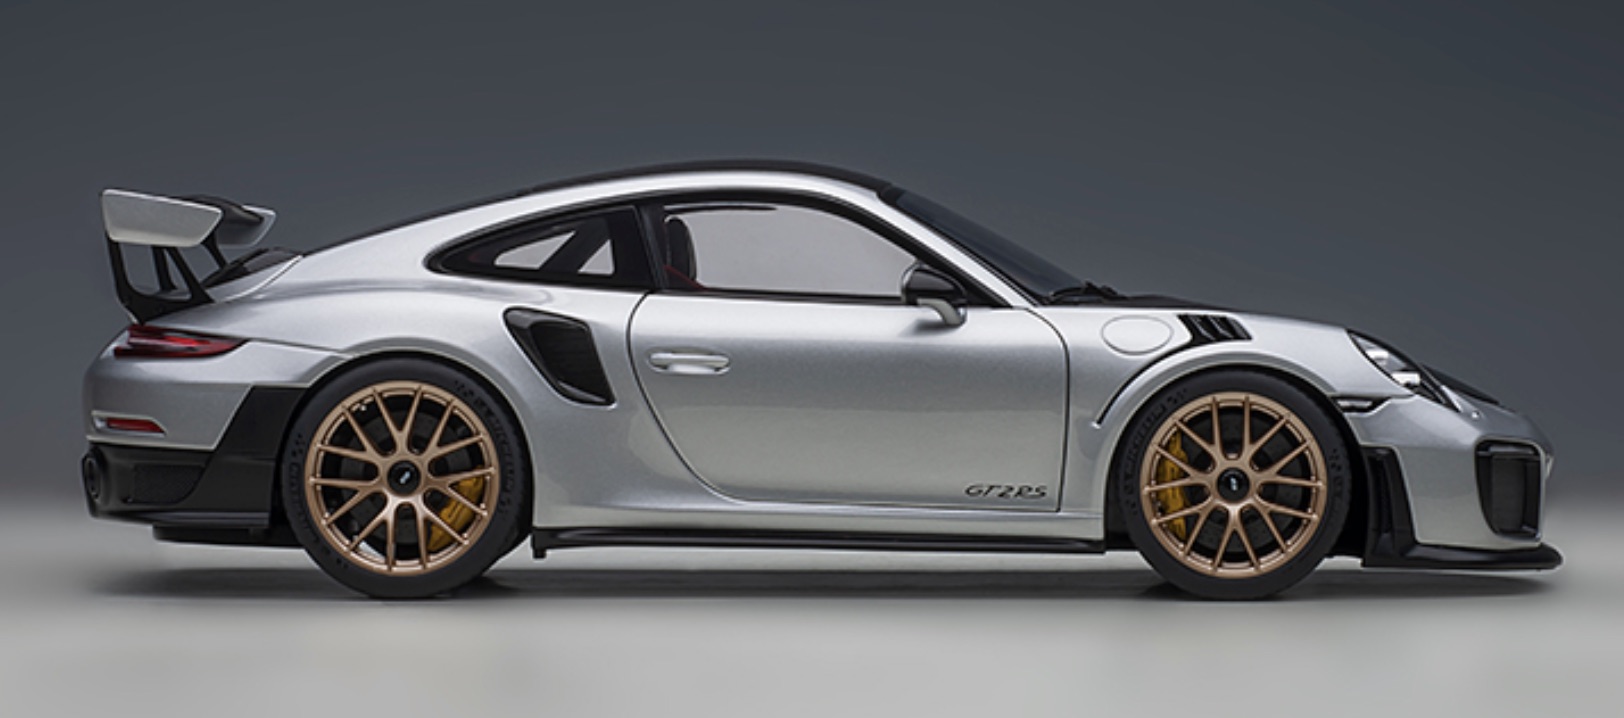 Porsche 911, 991, GT2 RS Scale Model - Image 2 of 7